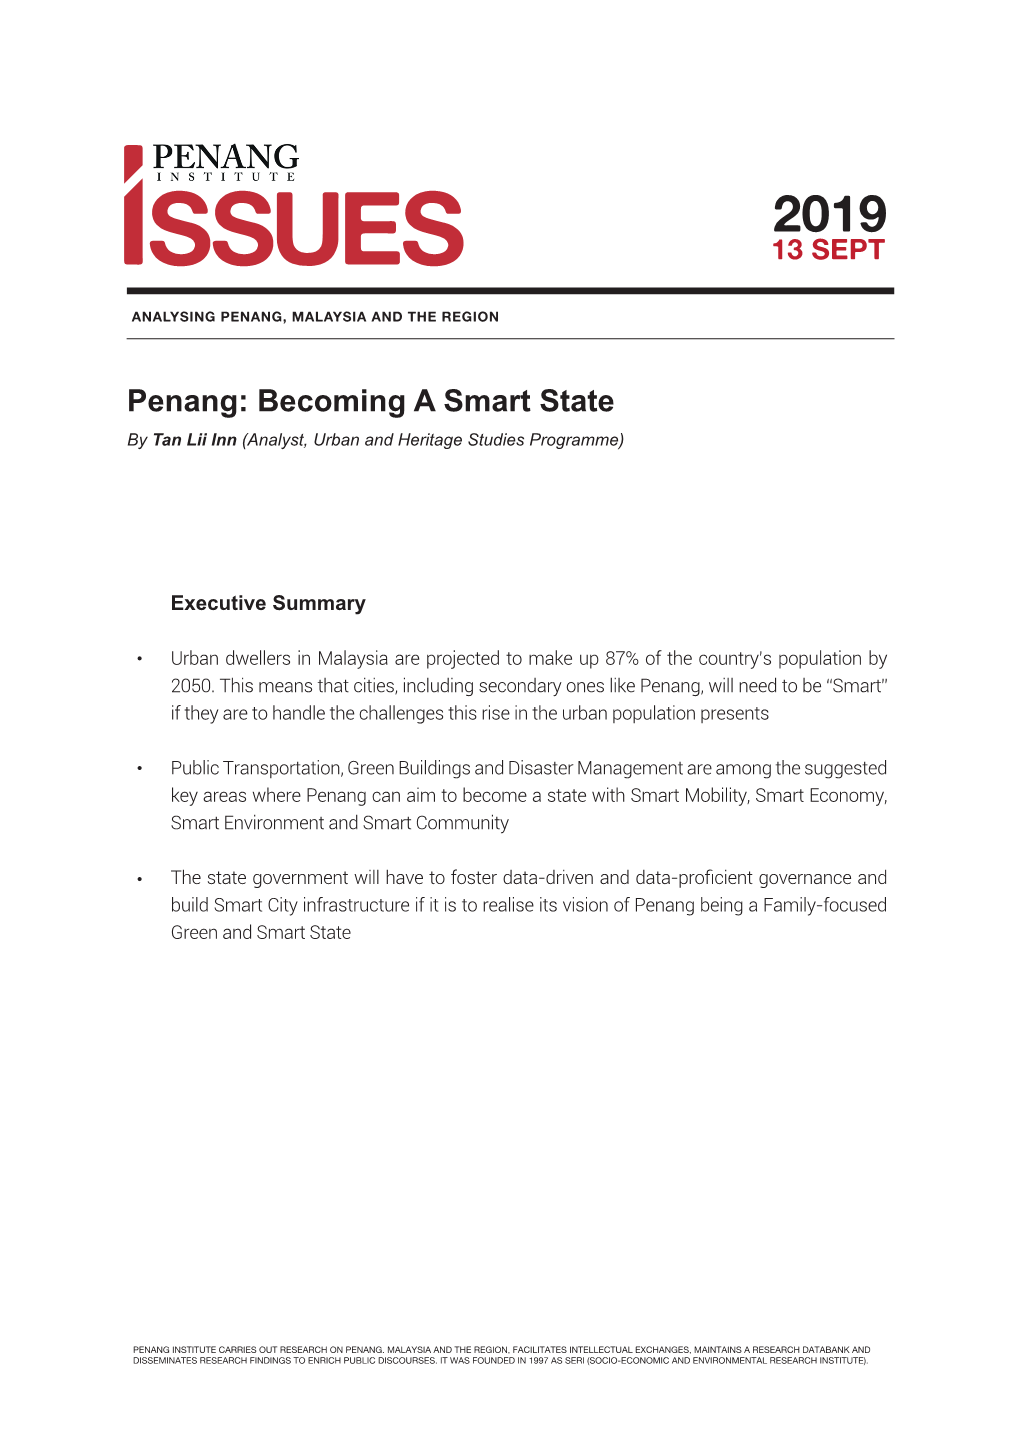 Penang: Becoming a Smart State by Tan Lii Inn (Analyst, Urban and Heritage Studies Programme)